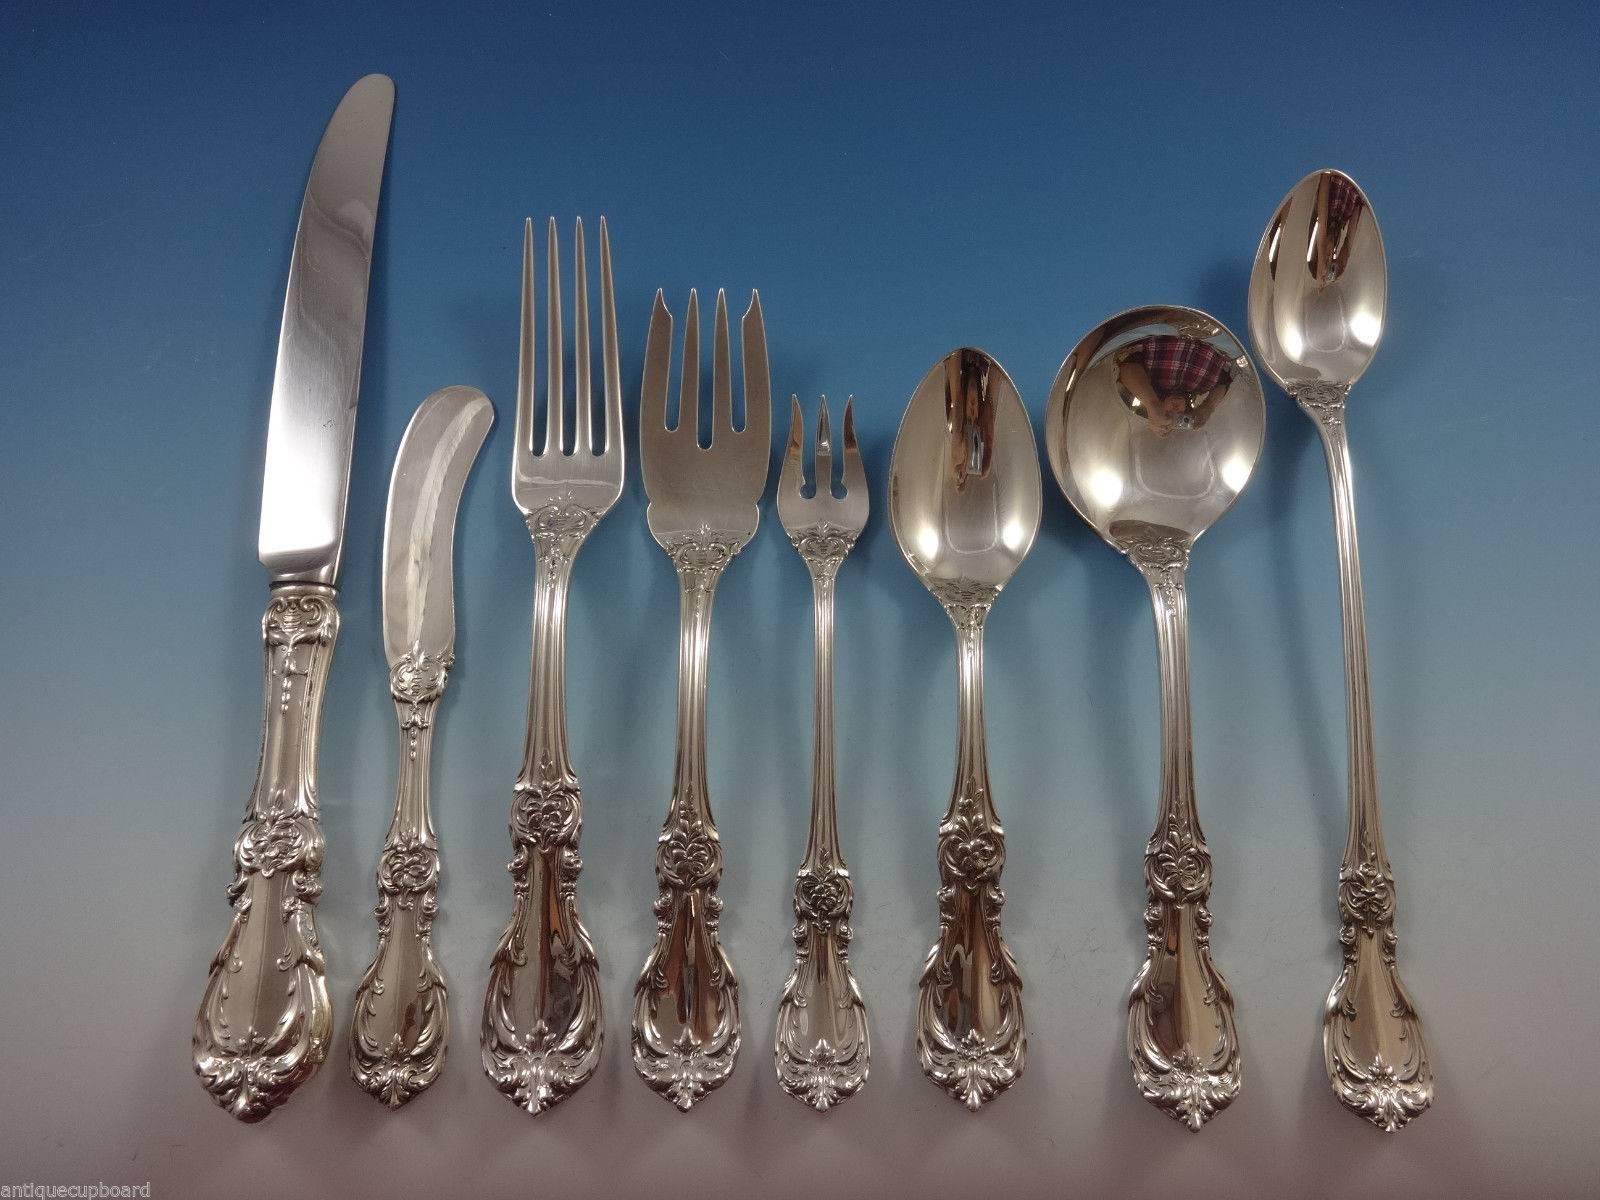 Inspired by the French Renaissance, the Burgundy Sterling Silver flatware pattern from Reed & Barton is decorated with motifs of scrolls, leaves and flowers which captures old world elegance with up-to-date flourishes. 

Beautiful huge Burgundy By